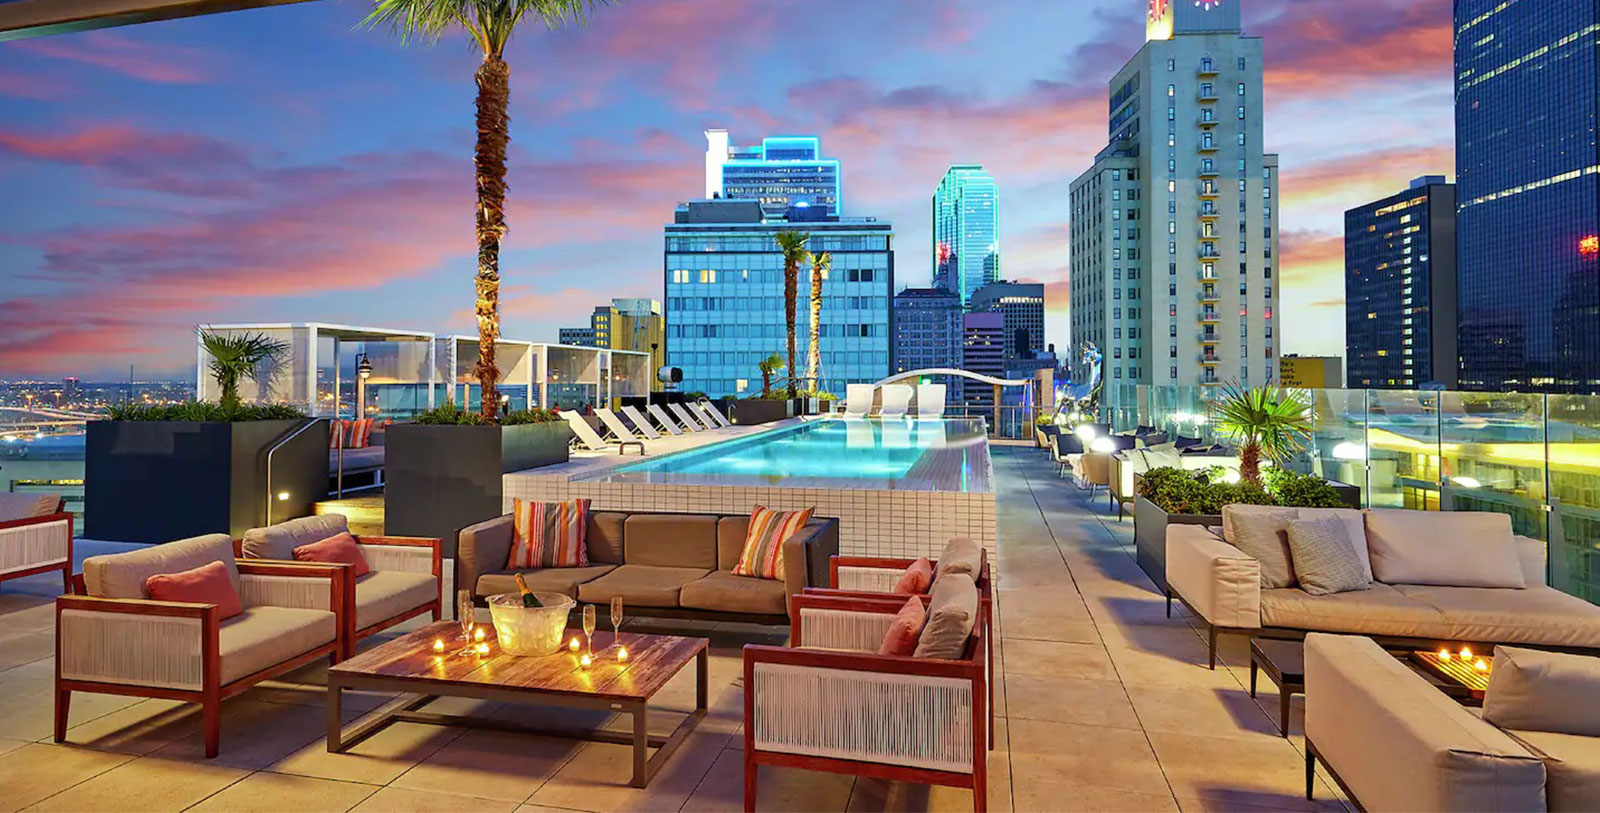 Image of Rooftop Pool at The Statler, 1956, Member of Historic Hotels of America, in Dallas, Texas, Experience